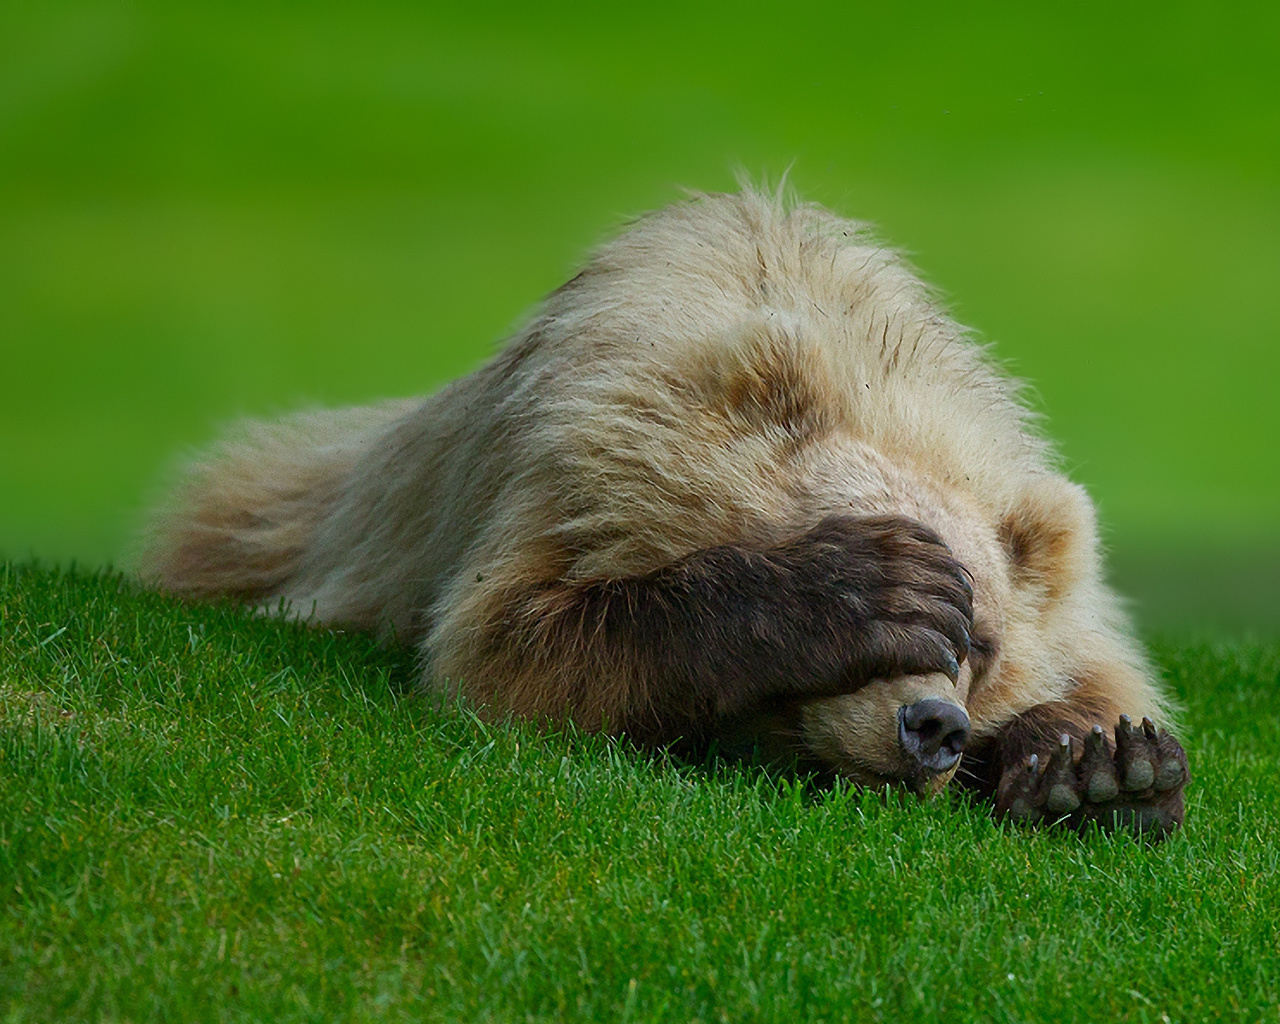 bear, claws, grass, playing